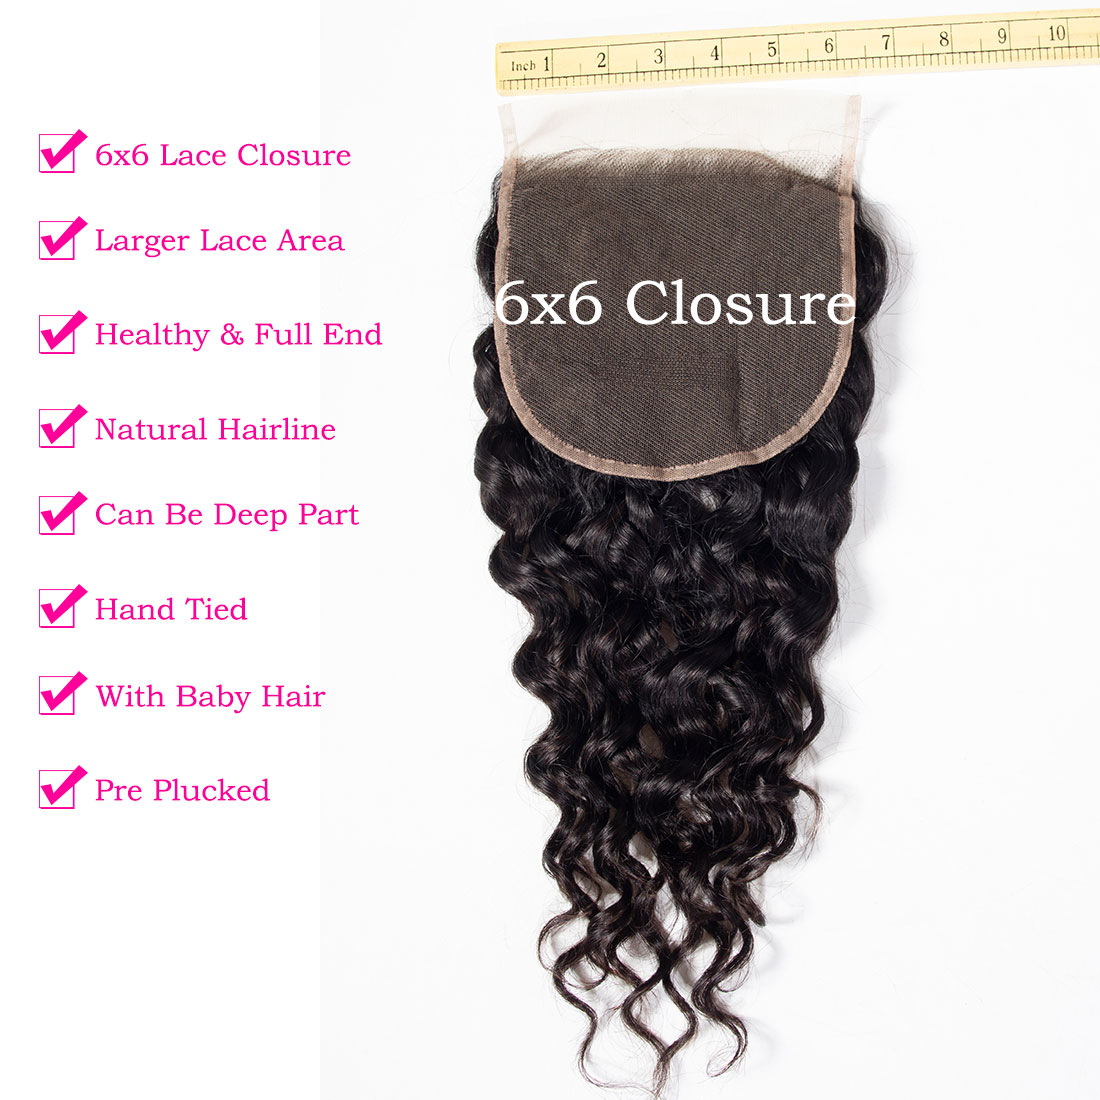 6×6 Water Wave Lace Closure